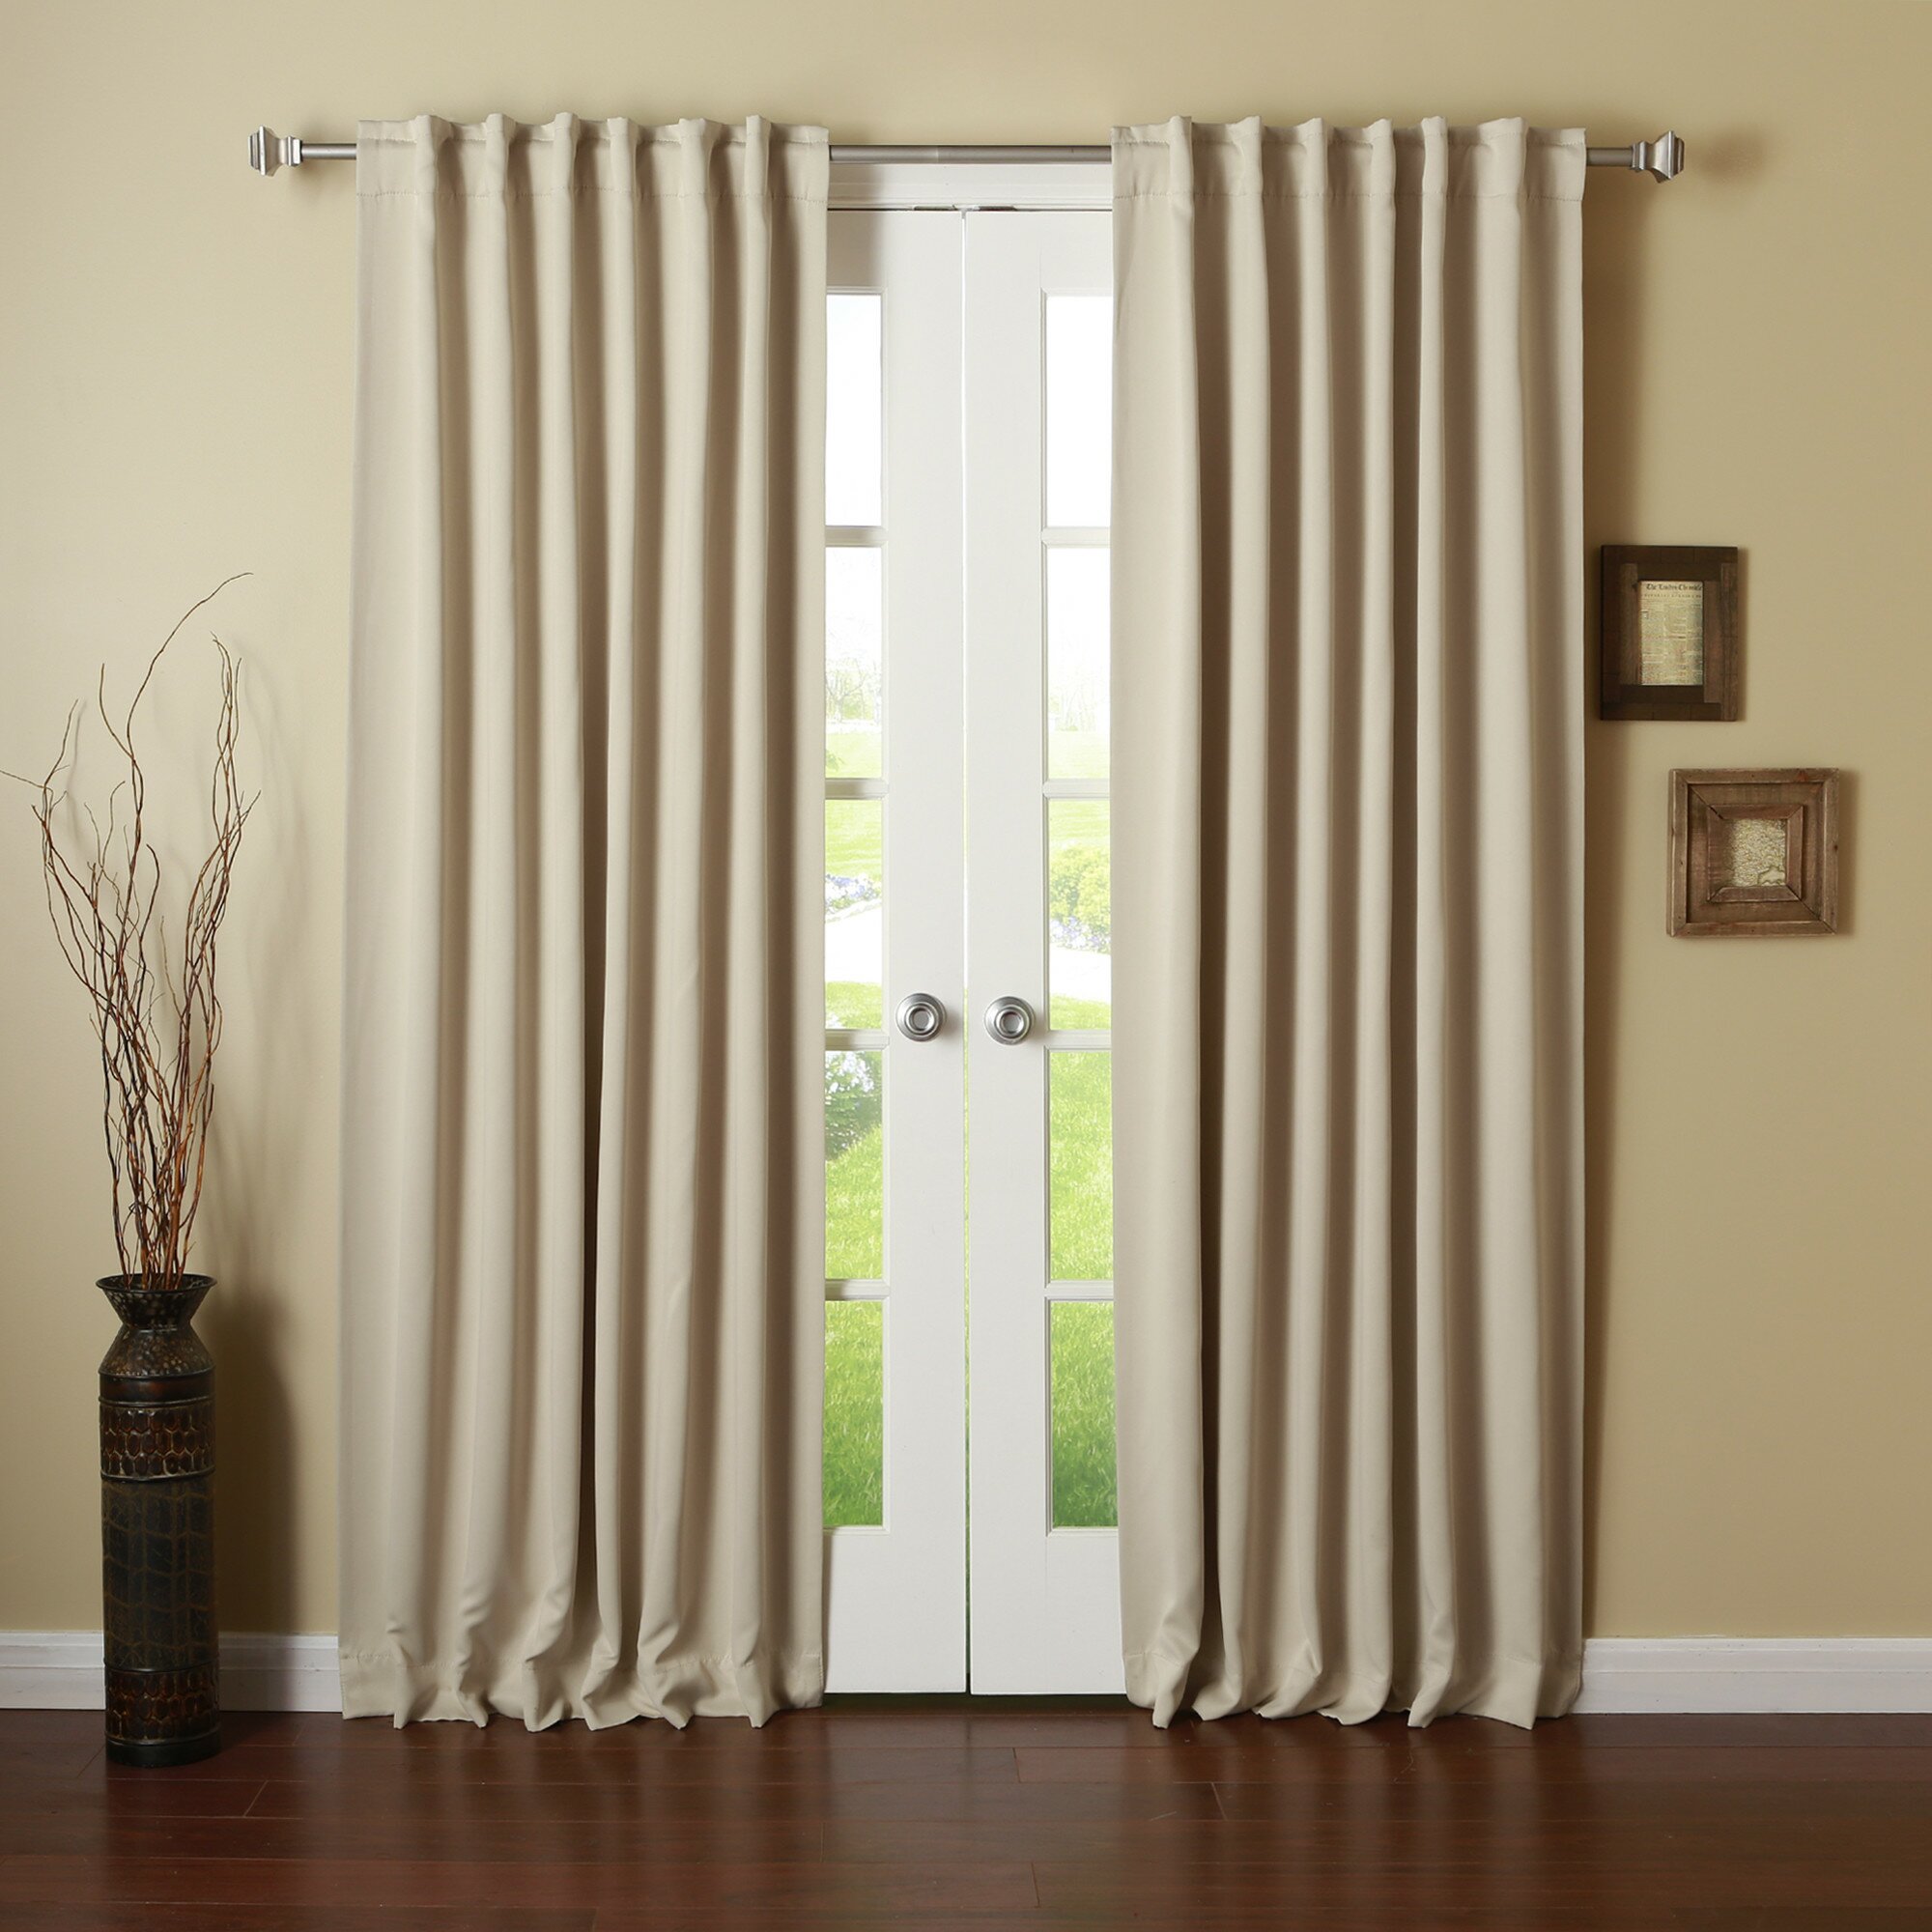 Thermal Black Out Curtains | Light Canceling Curtains | Cheap Blackout Curtains